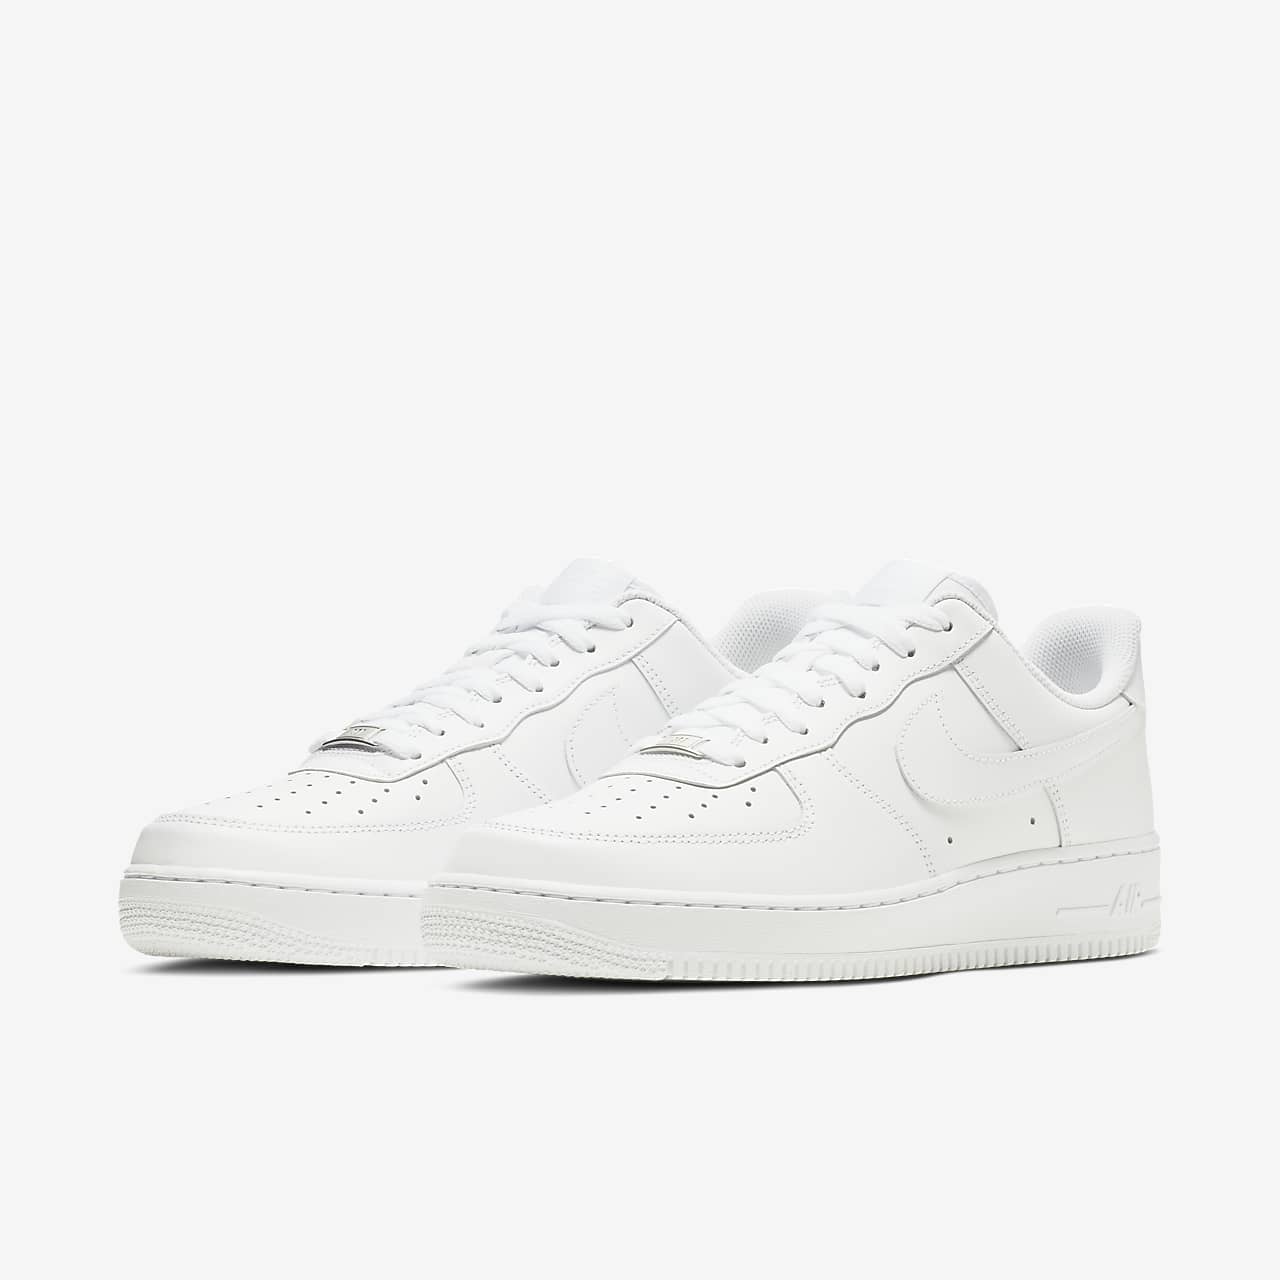 difference between mens and womens air force 1